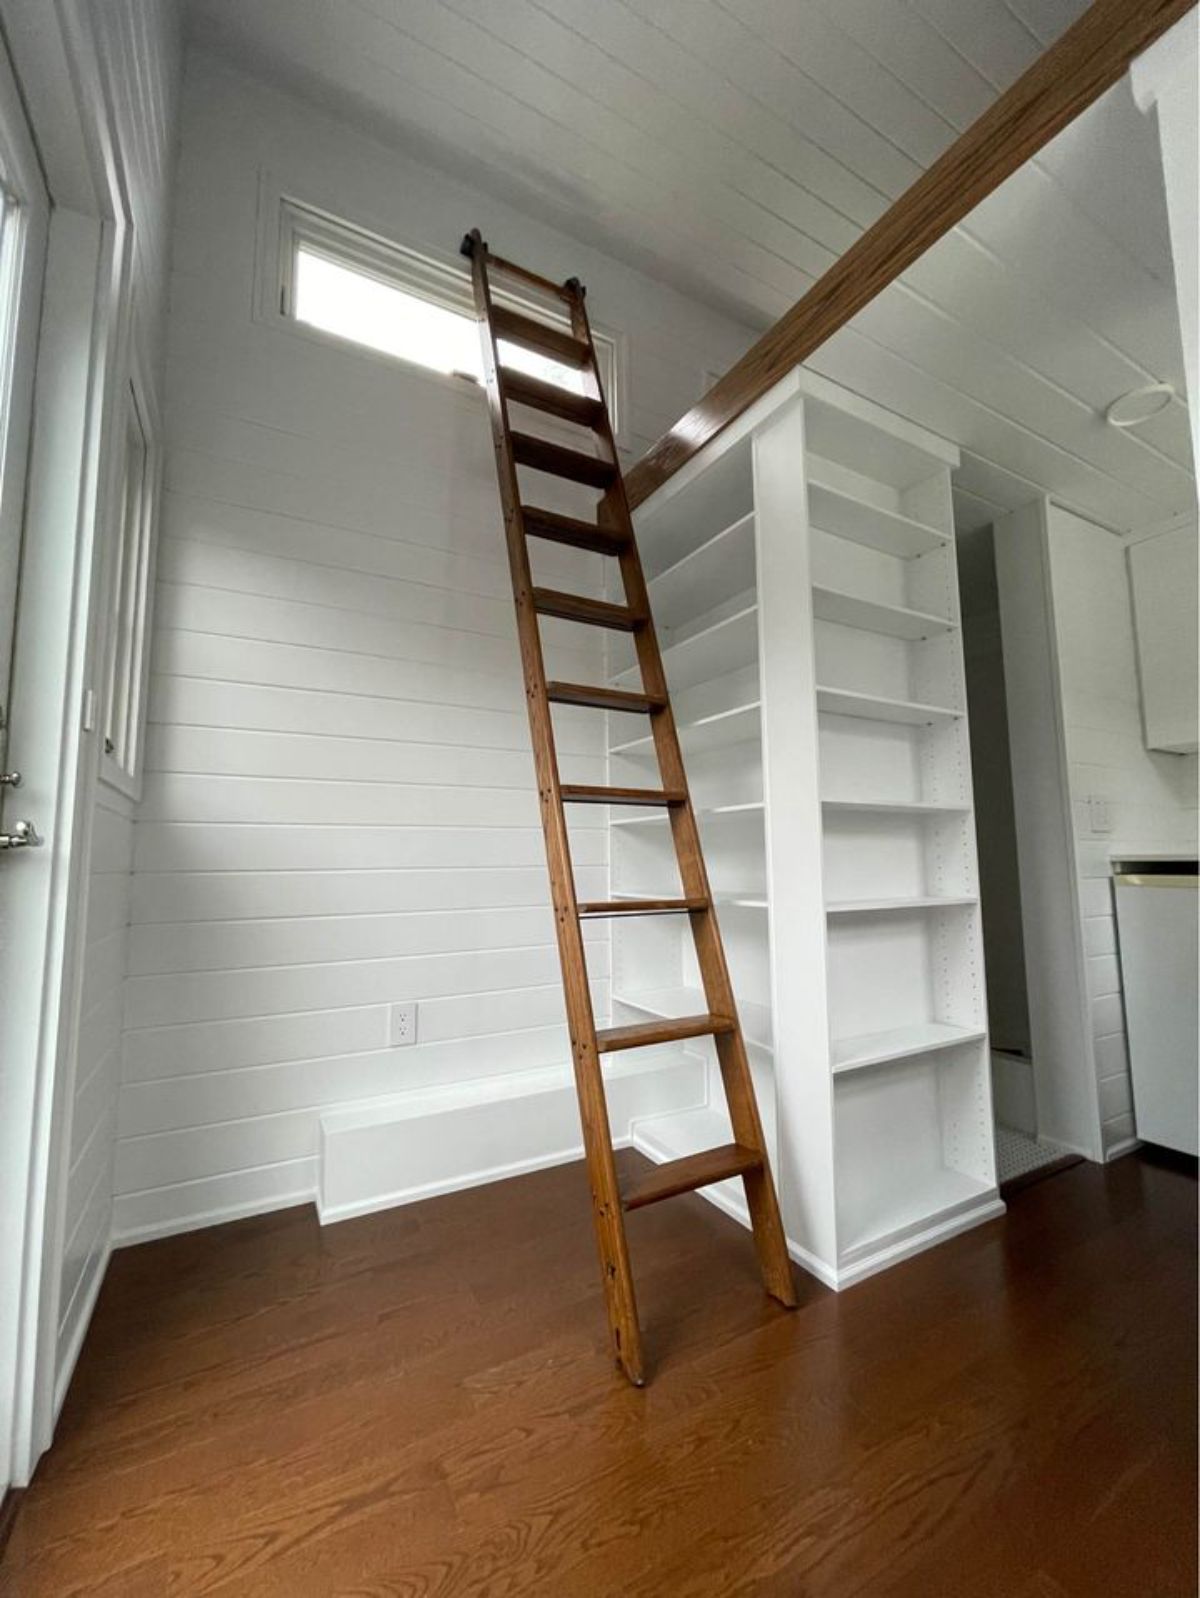 Wooden flooring with white interiors and a ladder to bedroom area of Tiny House on Wheels